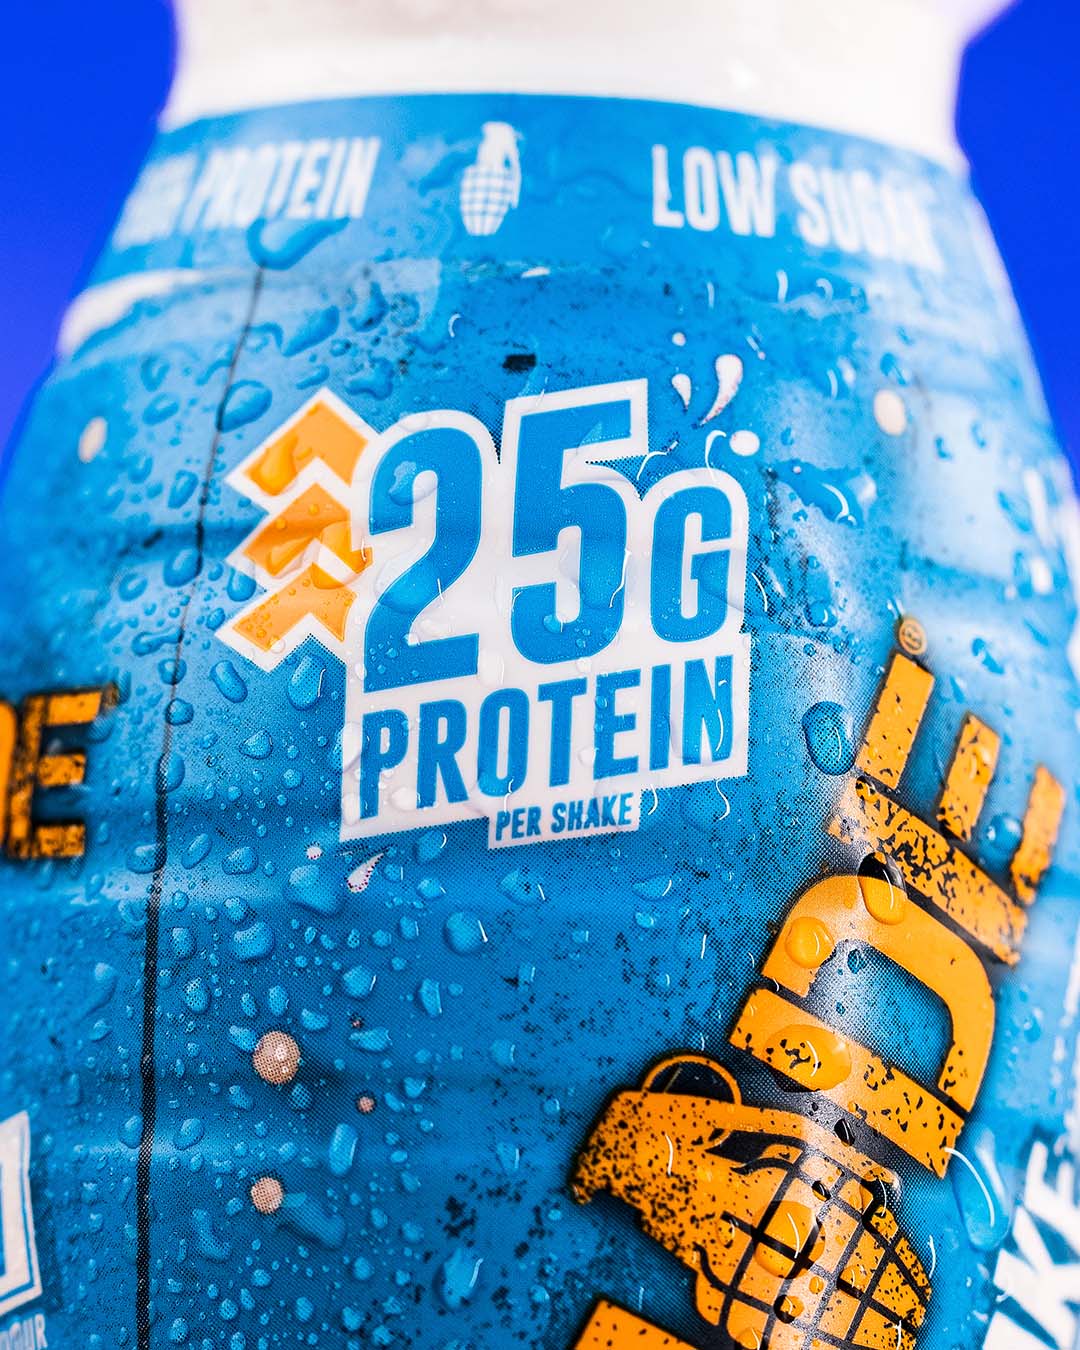 Text showing label "25g Protein per shake"